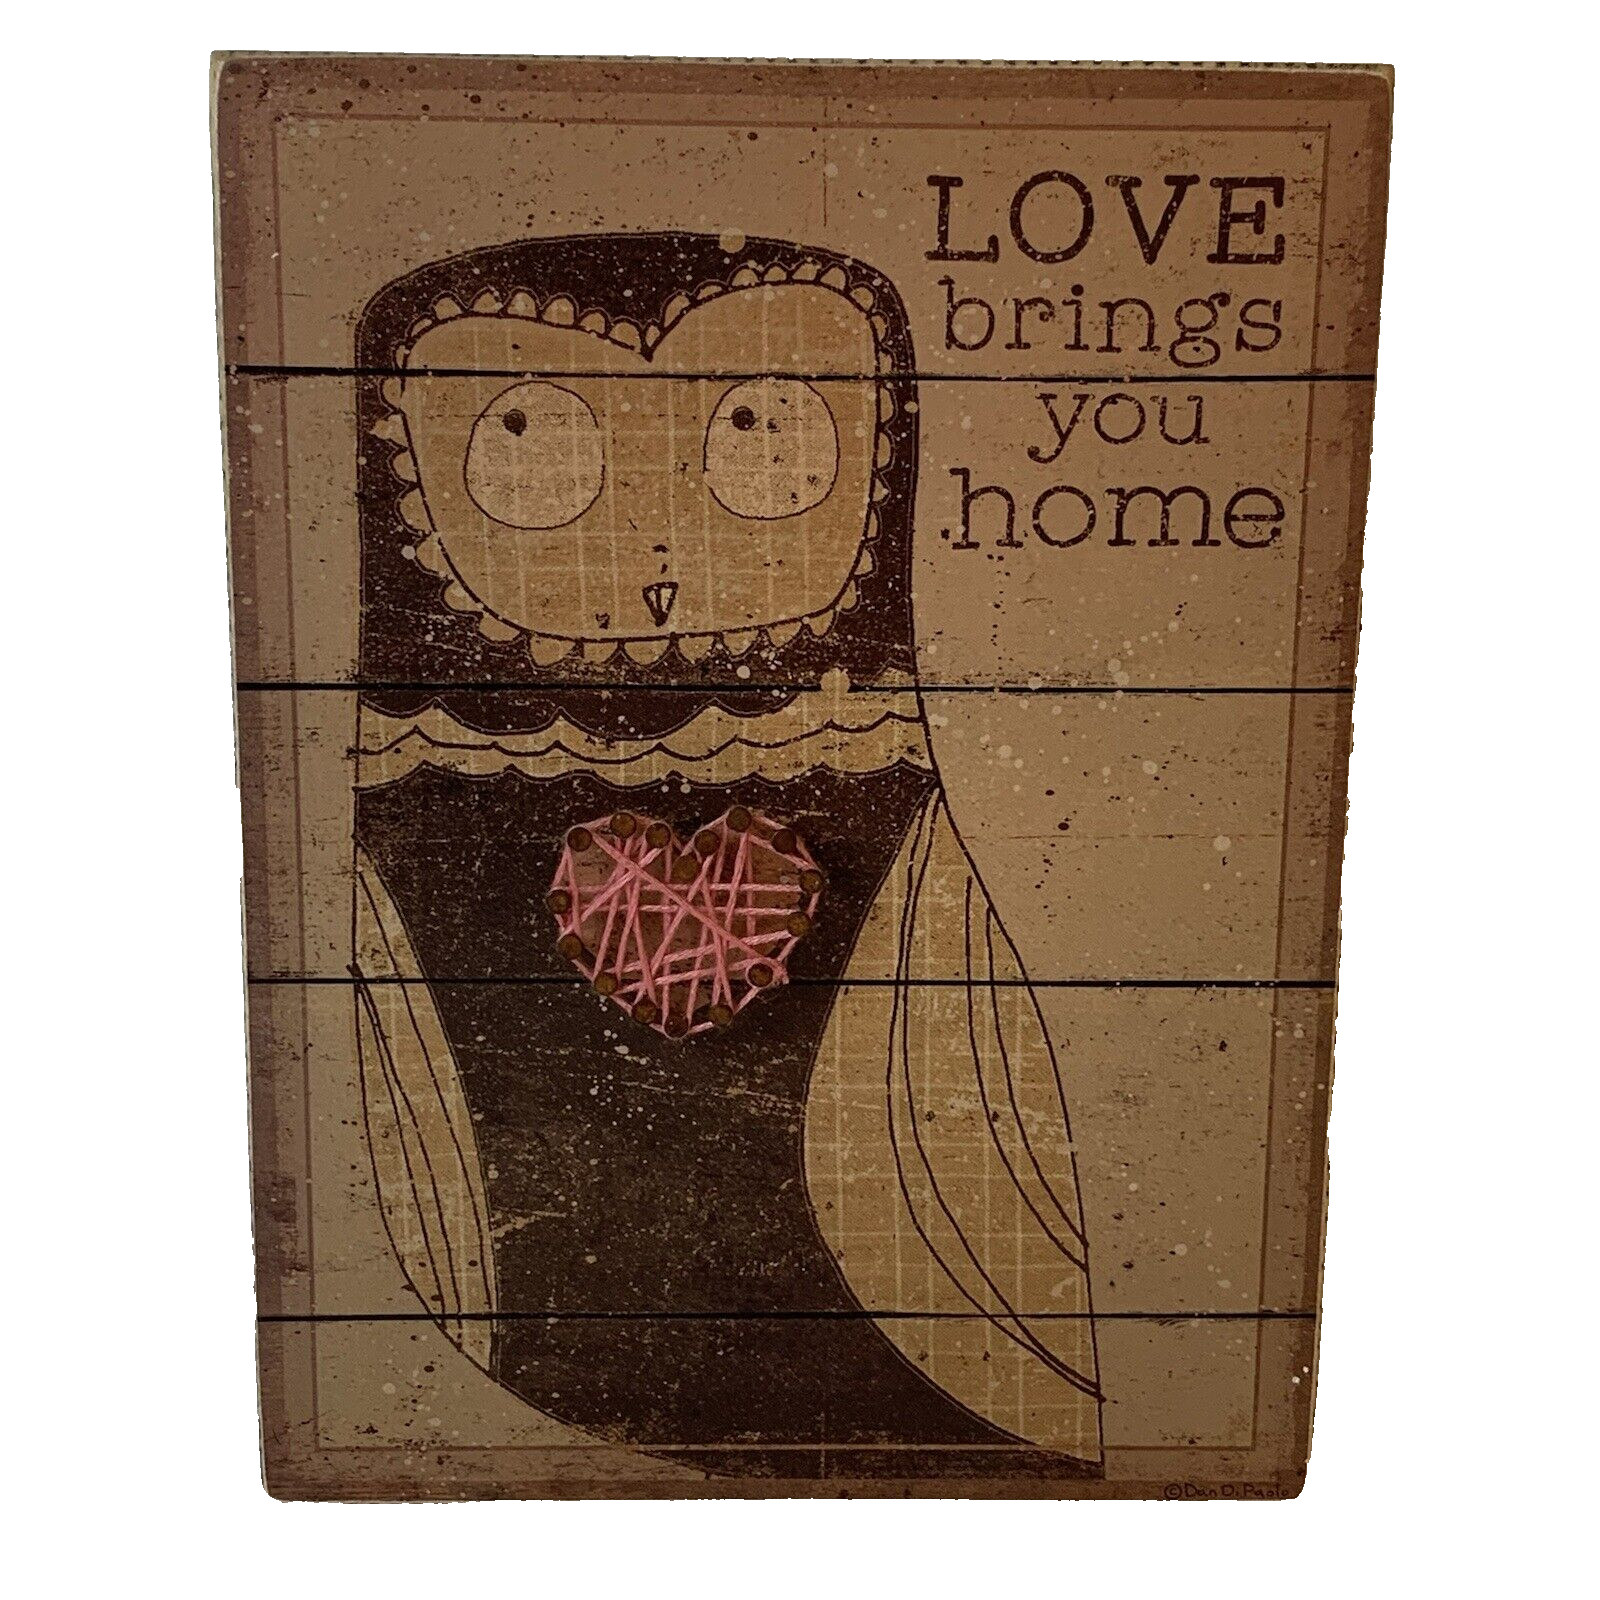 Primary image for Primitives By Kathy Wooden Owl Block Sign Love Brings You Home 8 x 6 Inch Decor